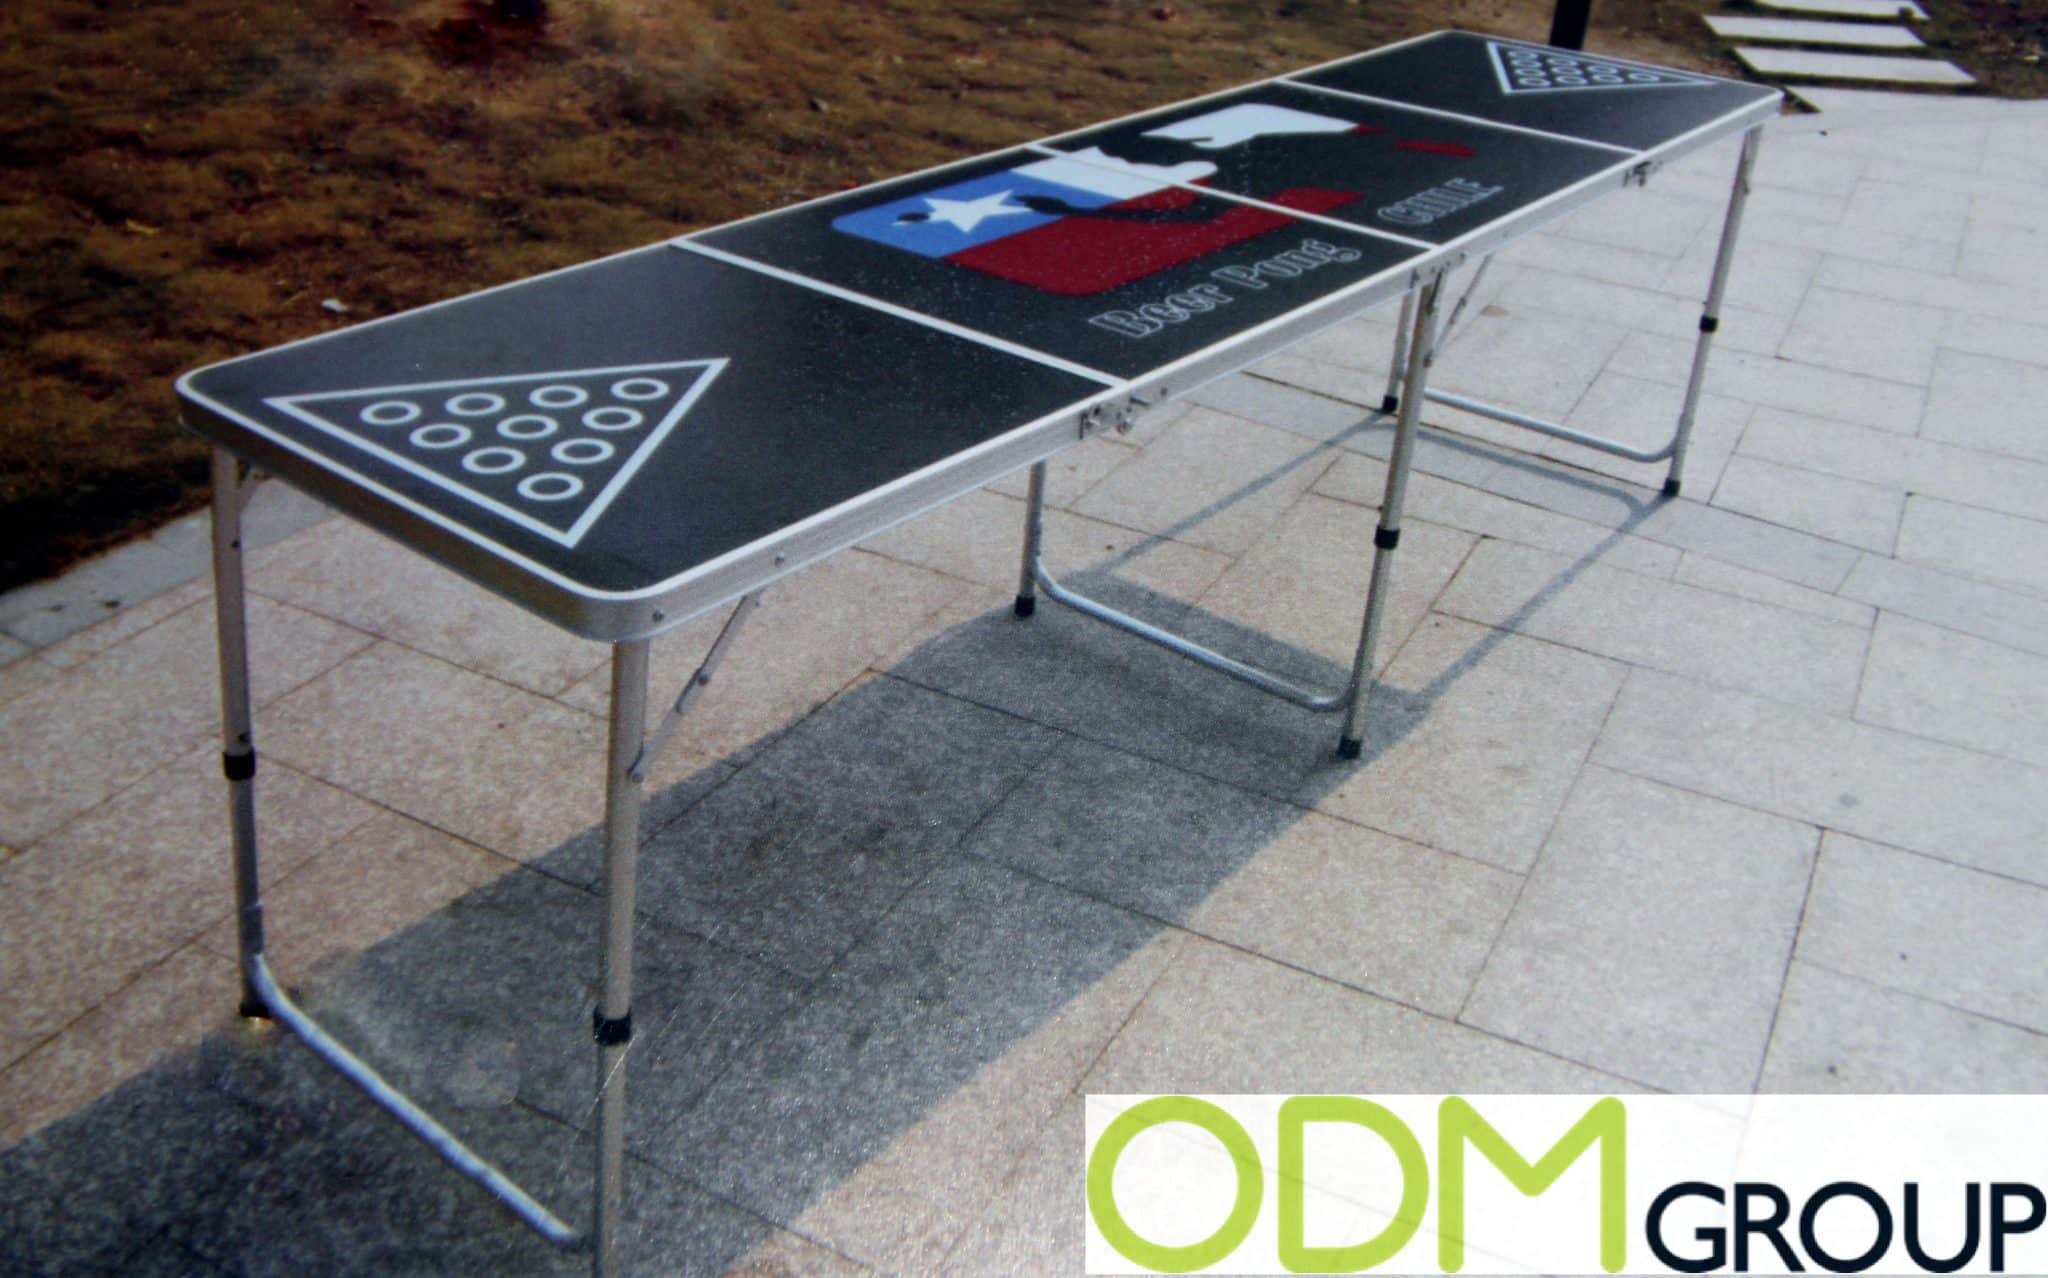 Unique Promotional Ideas: Branded Beer pong table